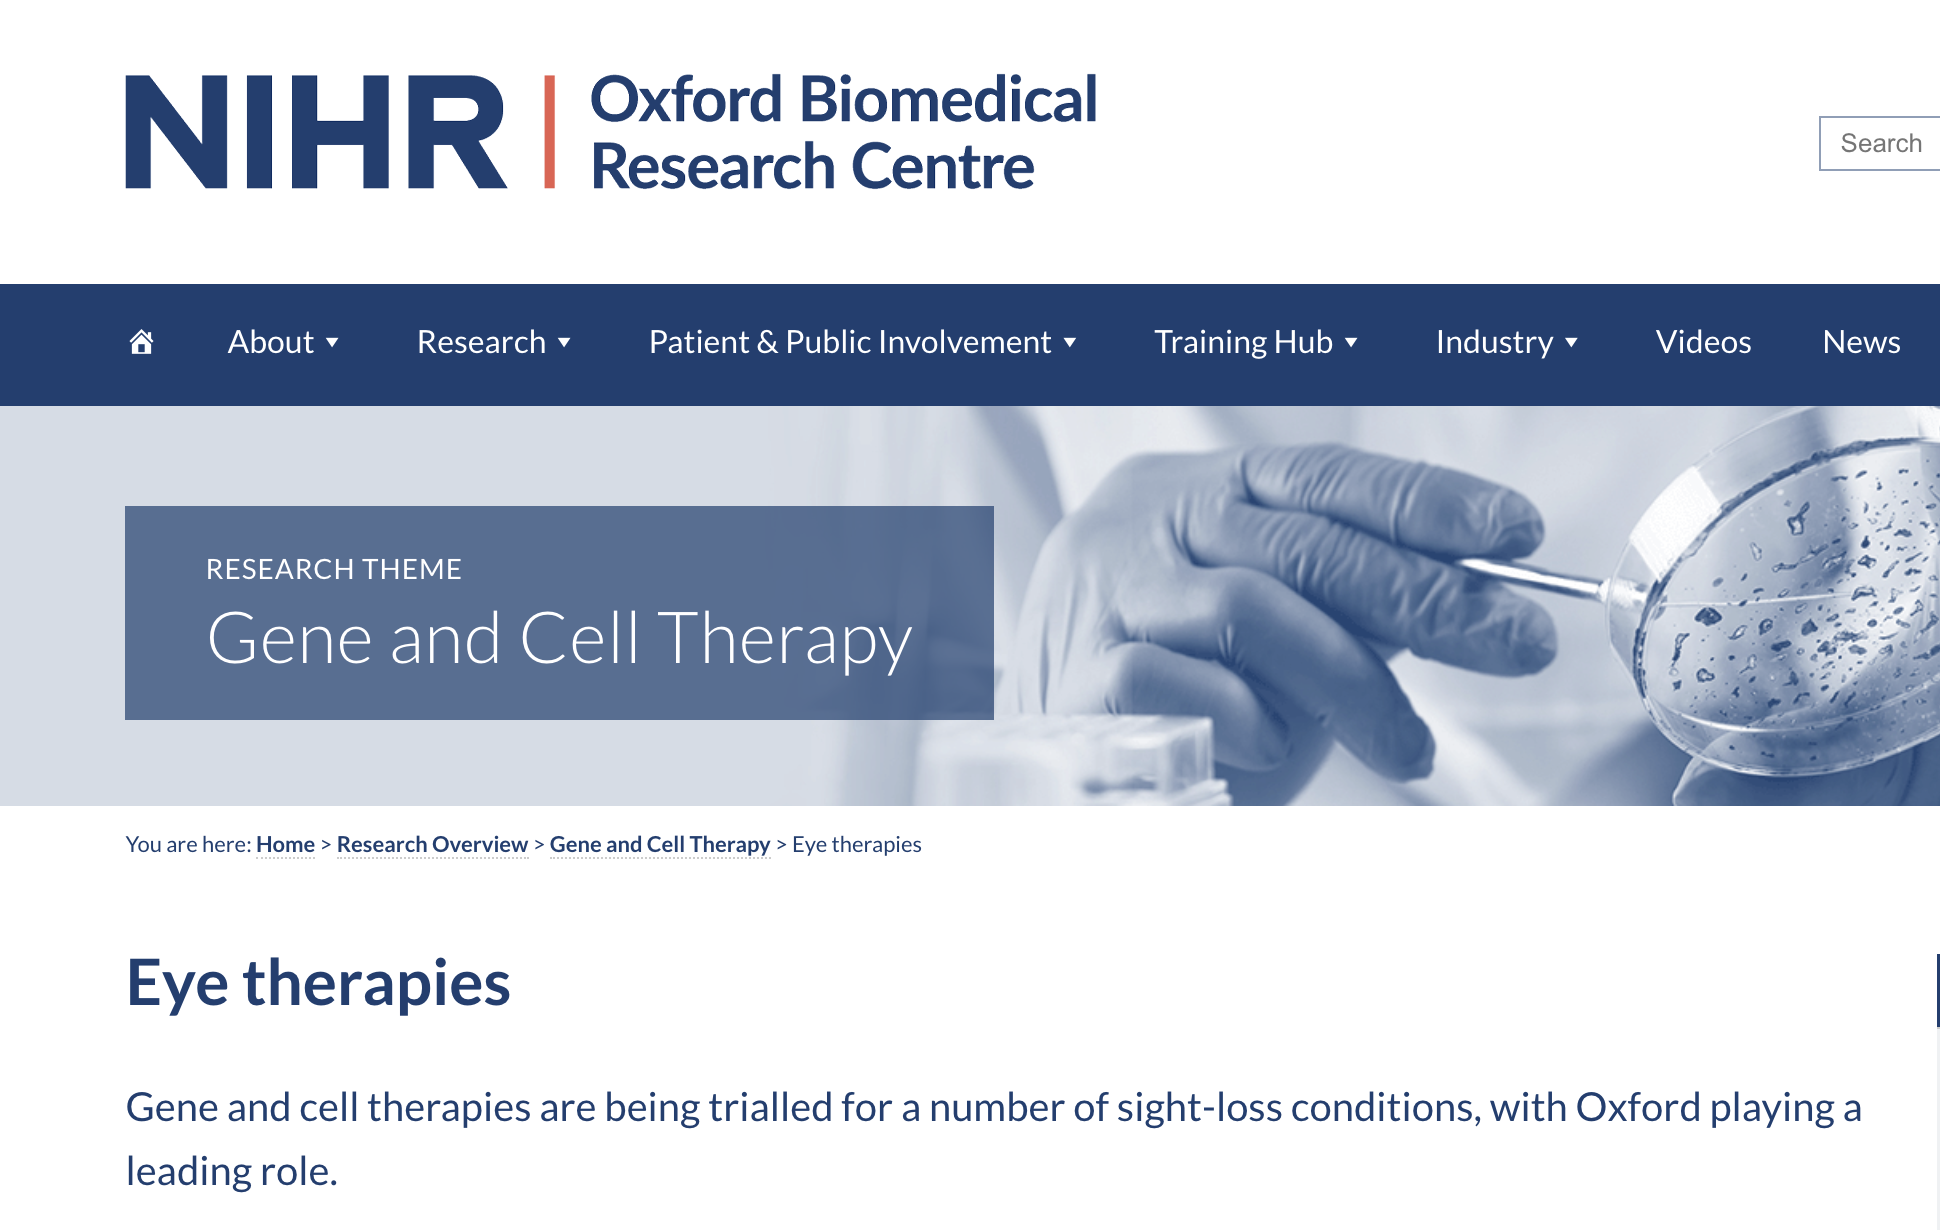 Link to Oxford Biomedical Research Centre